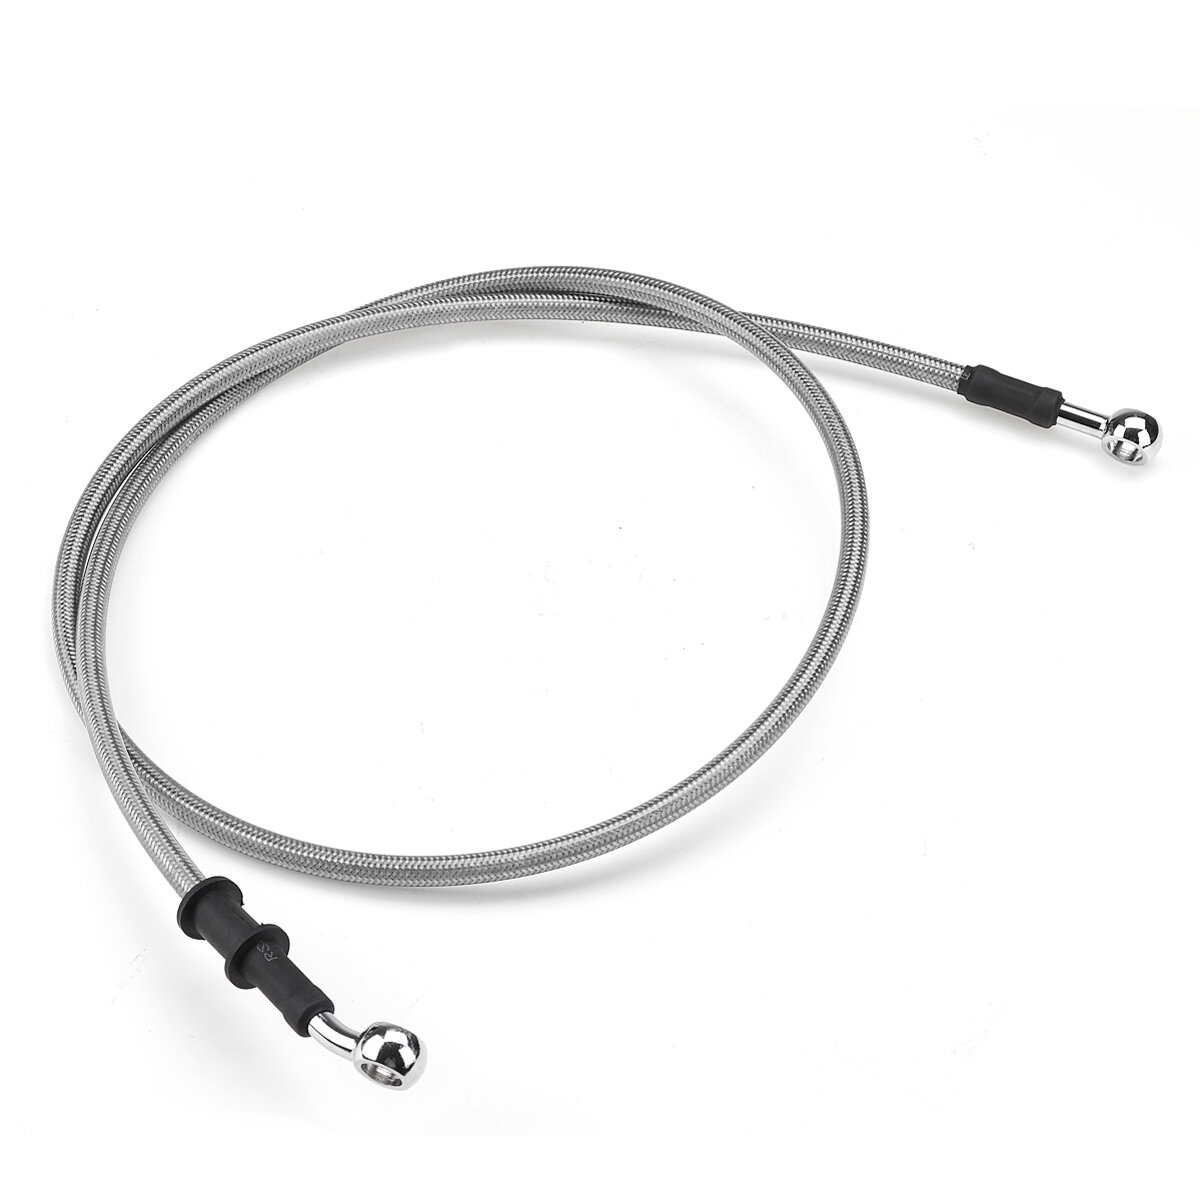 300mm-2200mm Motorcycle Braided Brake Clutch Oil Hose Line Cable Pipe Universal Silver